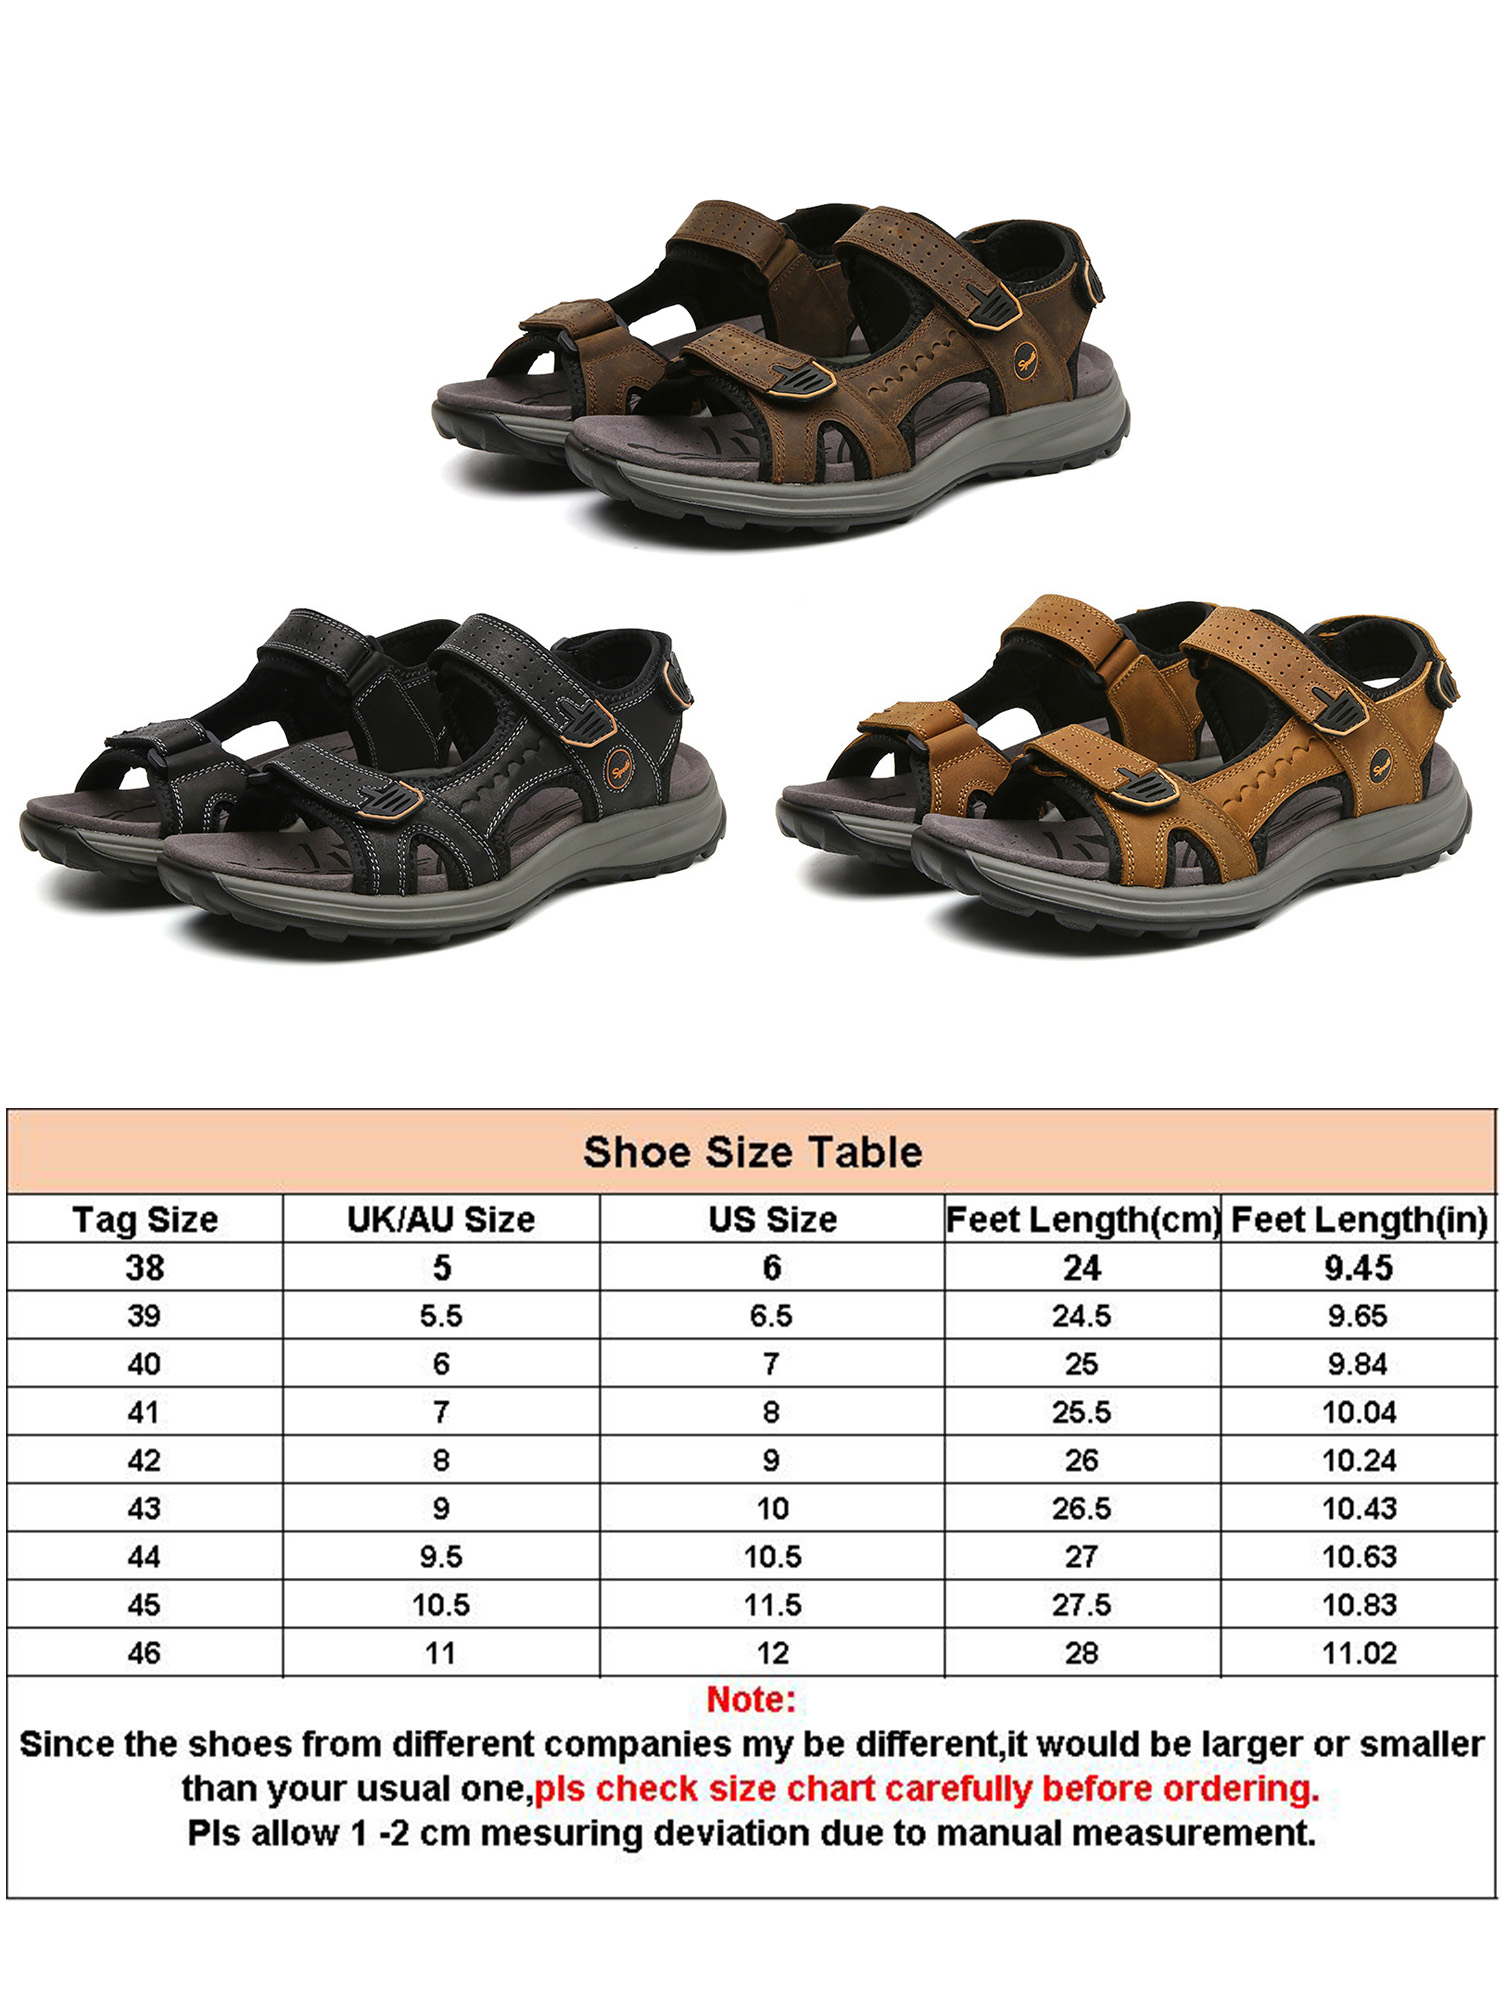 Audeban Men's Outdoor Hiking Sandals, Open Toe Arch Support Strap Water Sandals, Lightweight Athletic Trail Sport Sandals - image 2 of 5